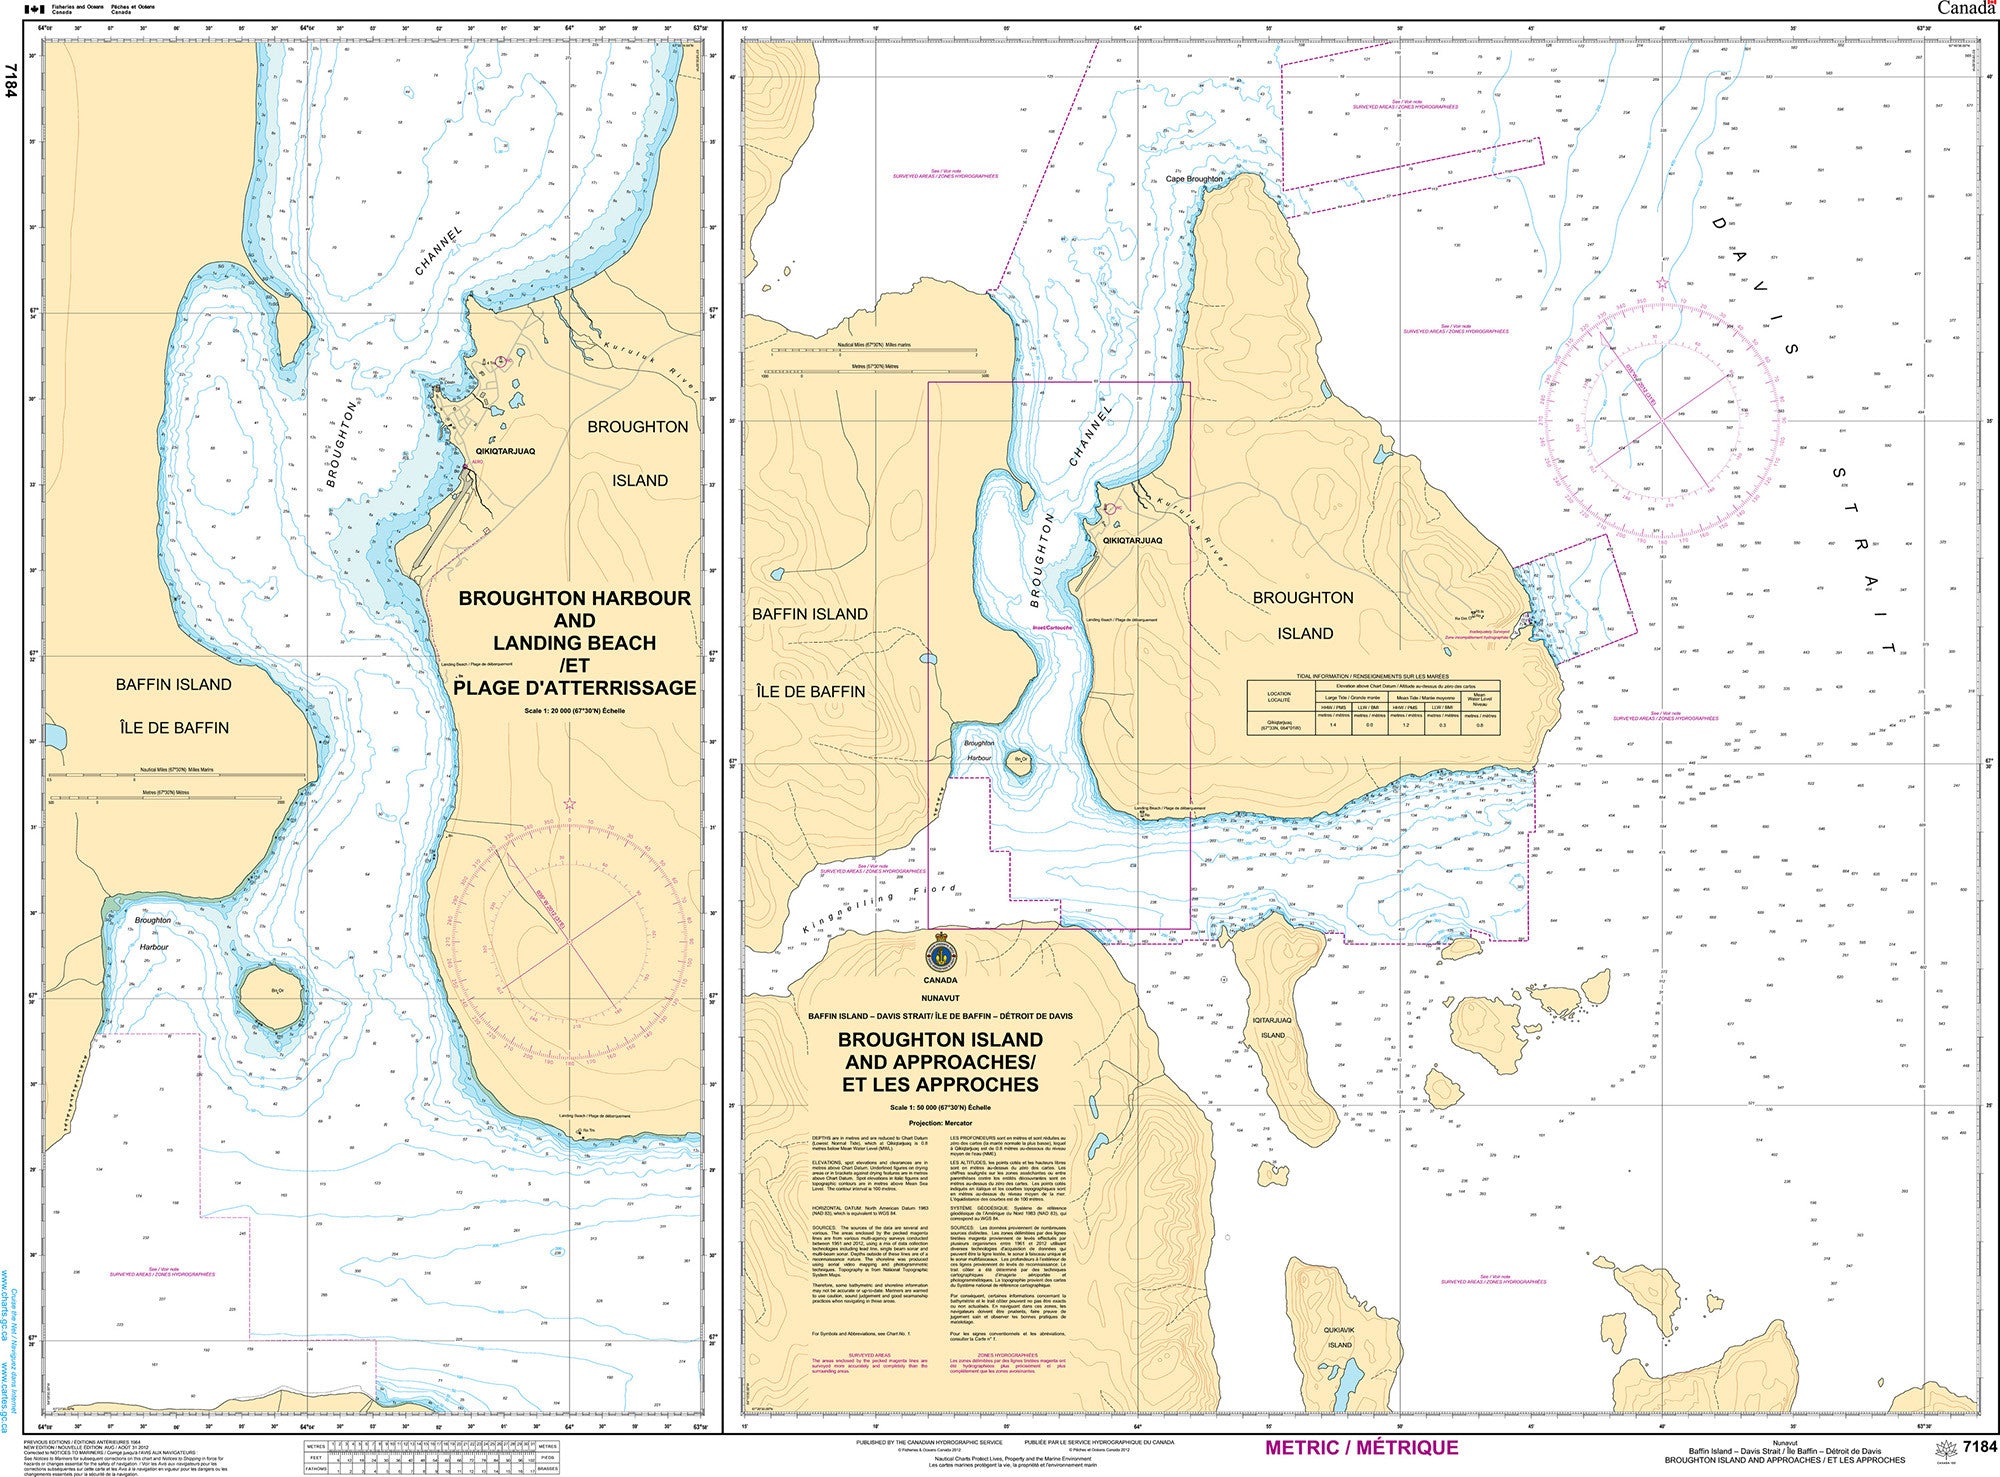 Canadian Hydrographic Service Nautical Chart CHS7184: Broughton Island and Approaches